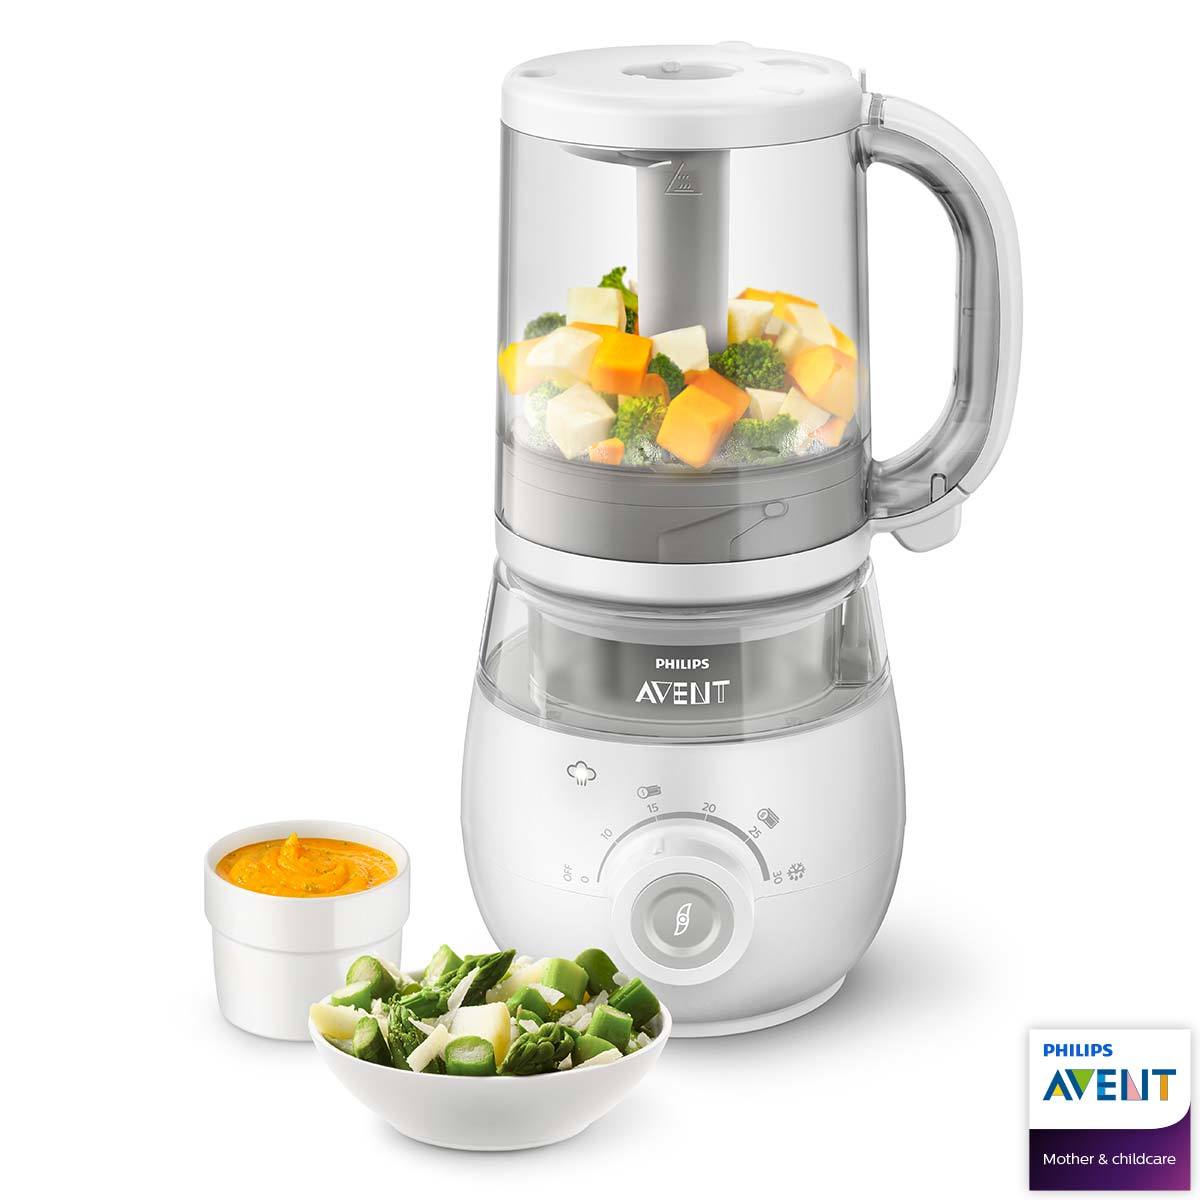 Philips Avent 4 in 1 Healthy Baby Food Maker